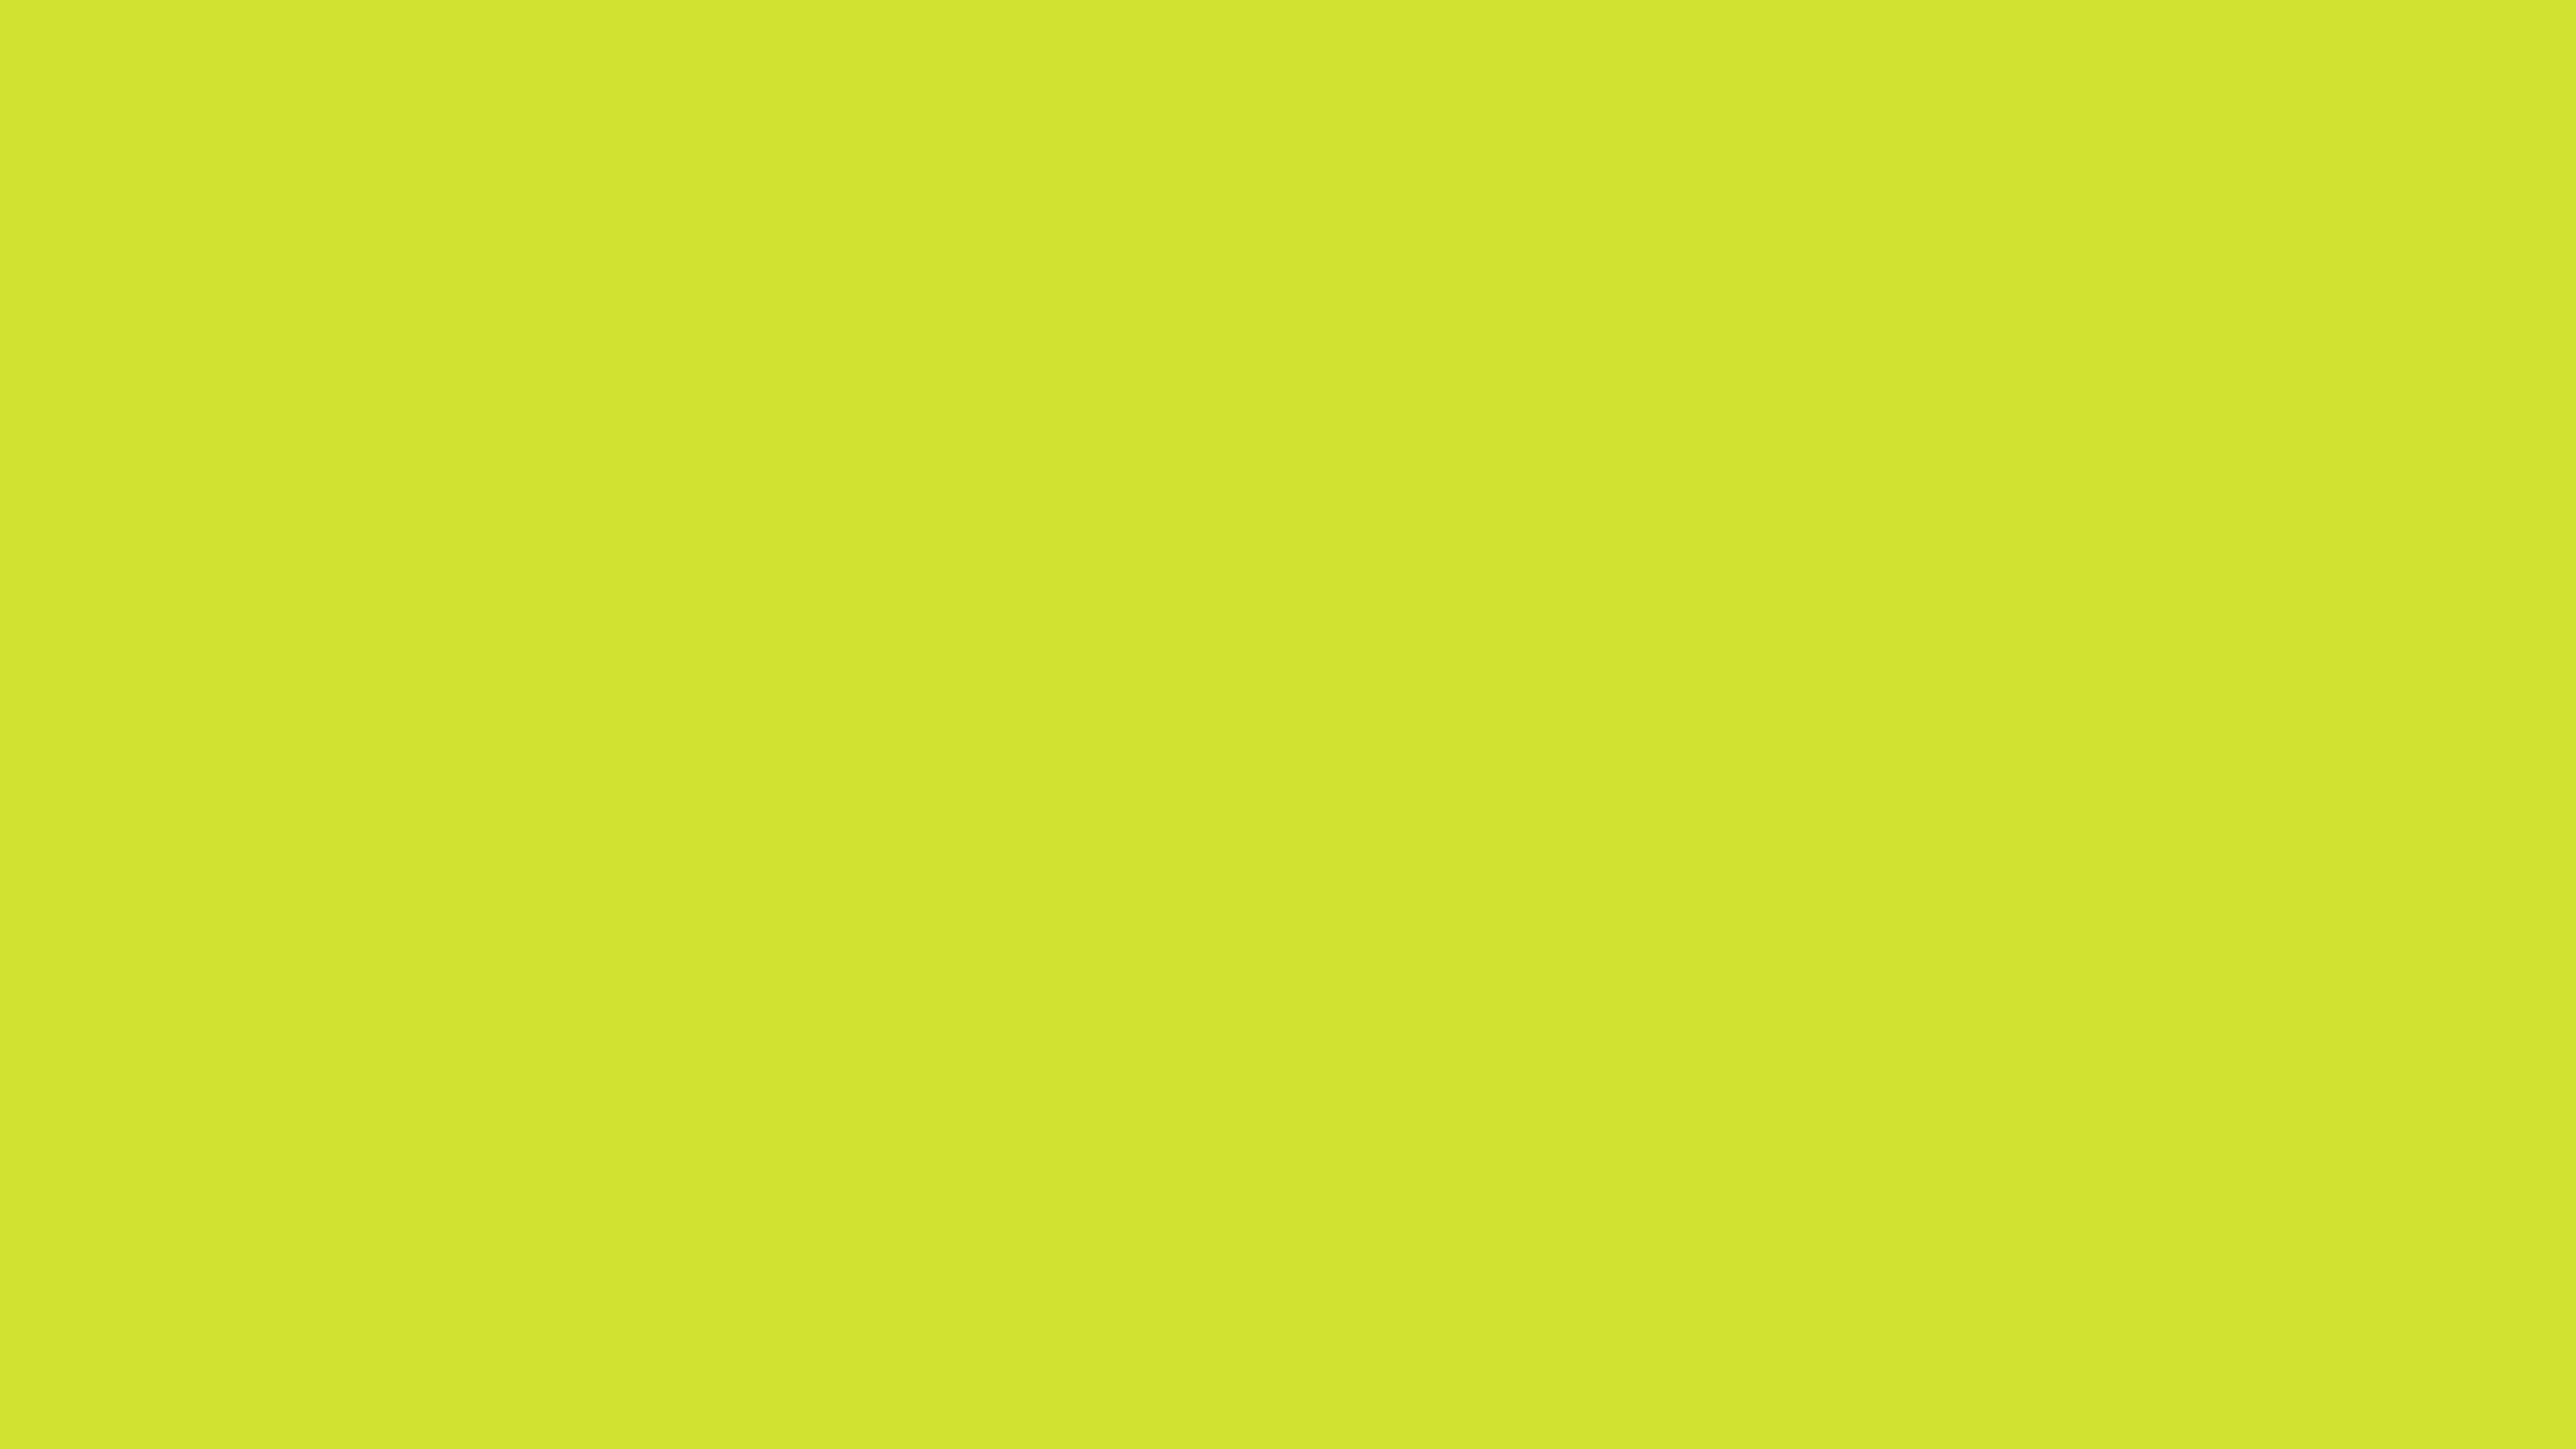 5120x2880 Pear Solid Color Background